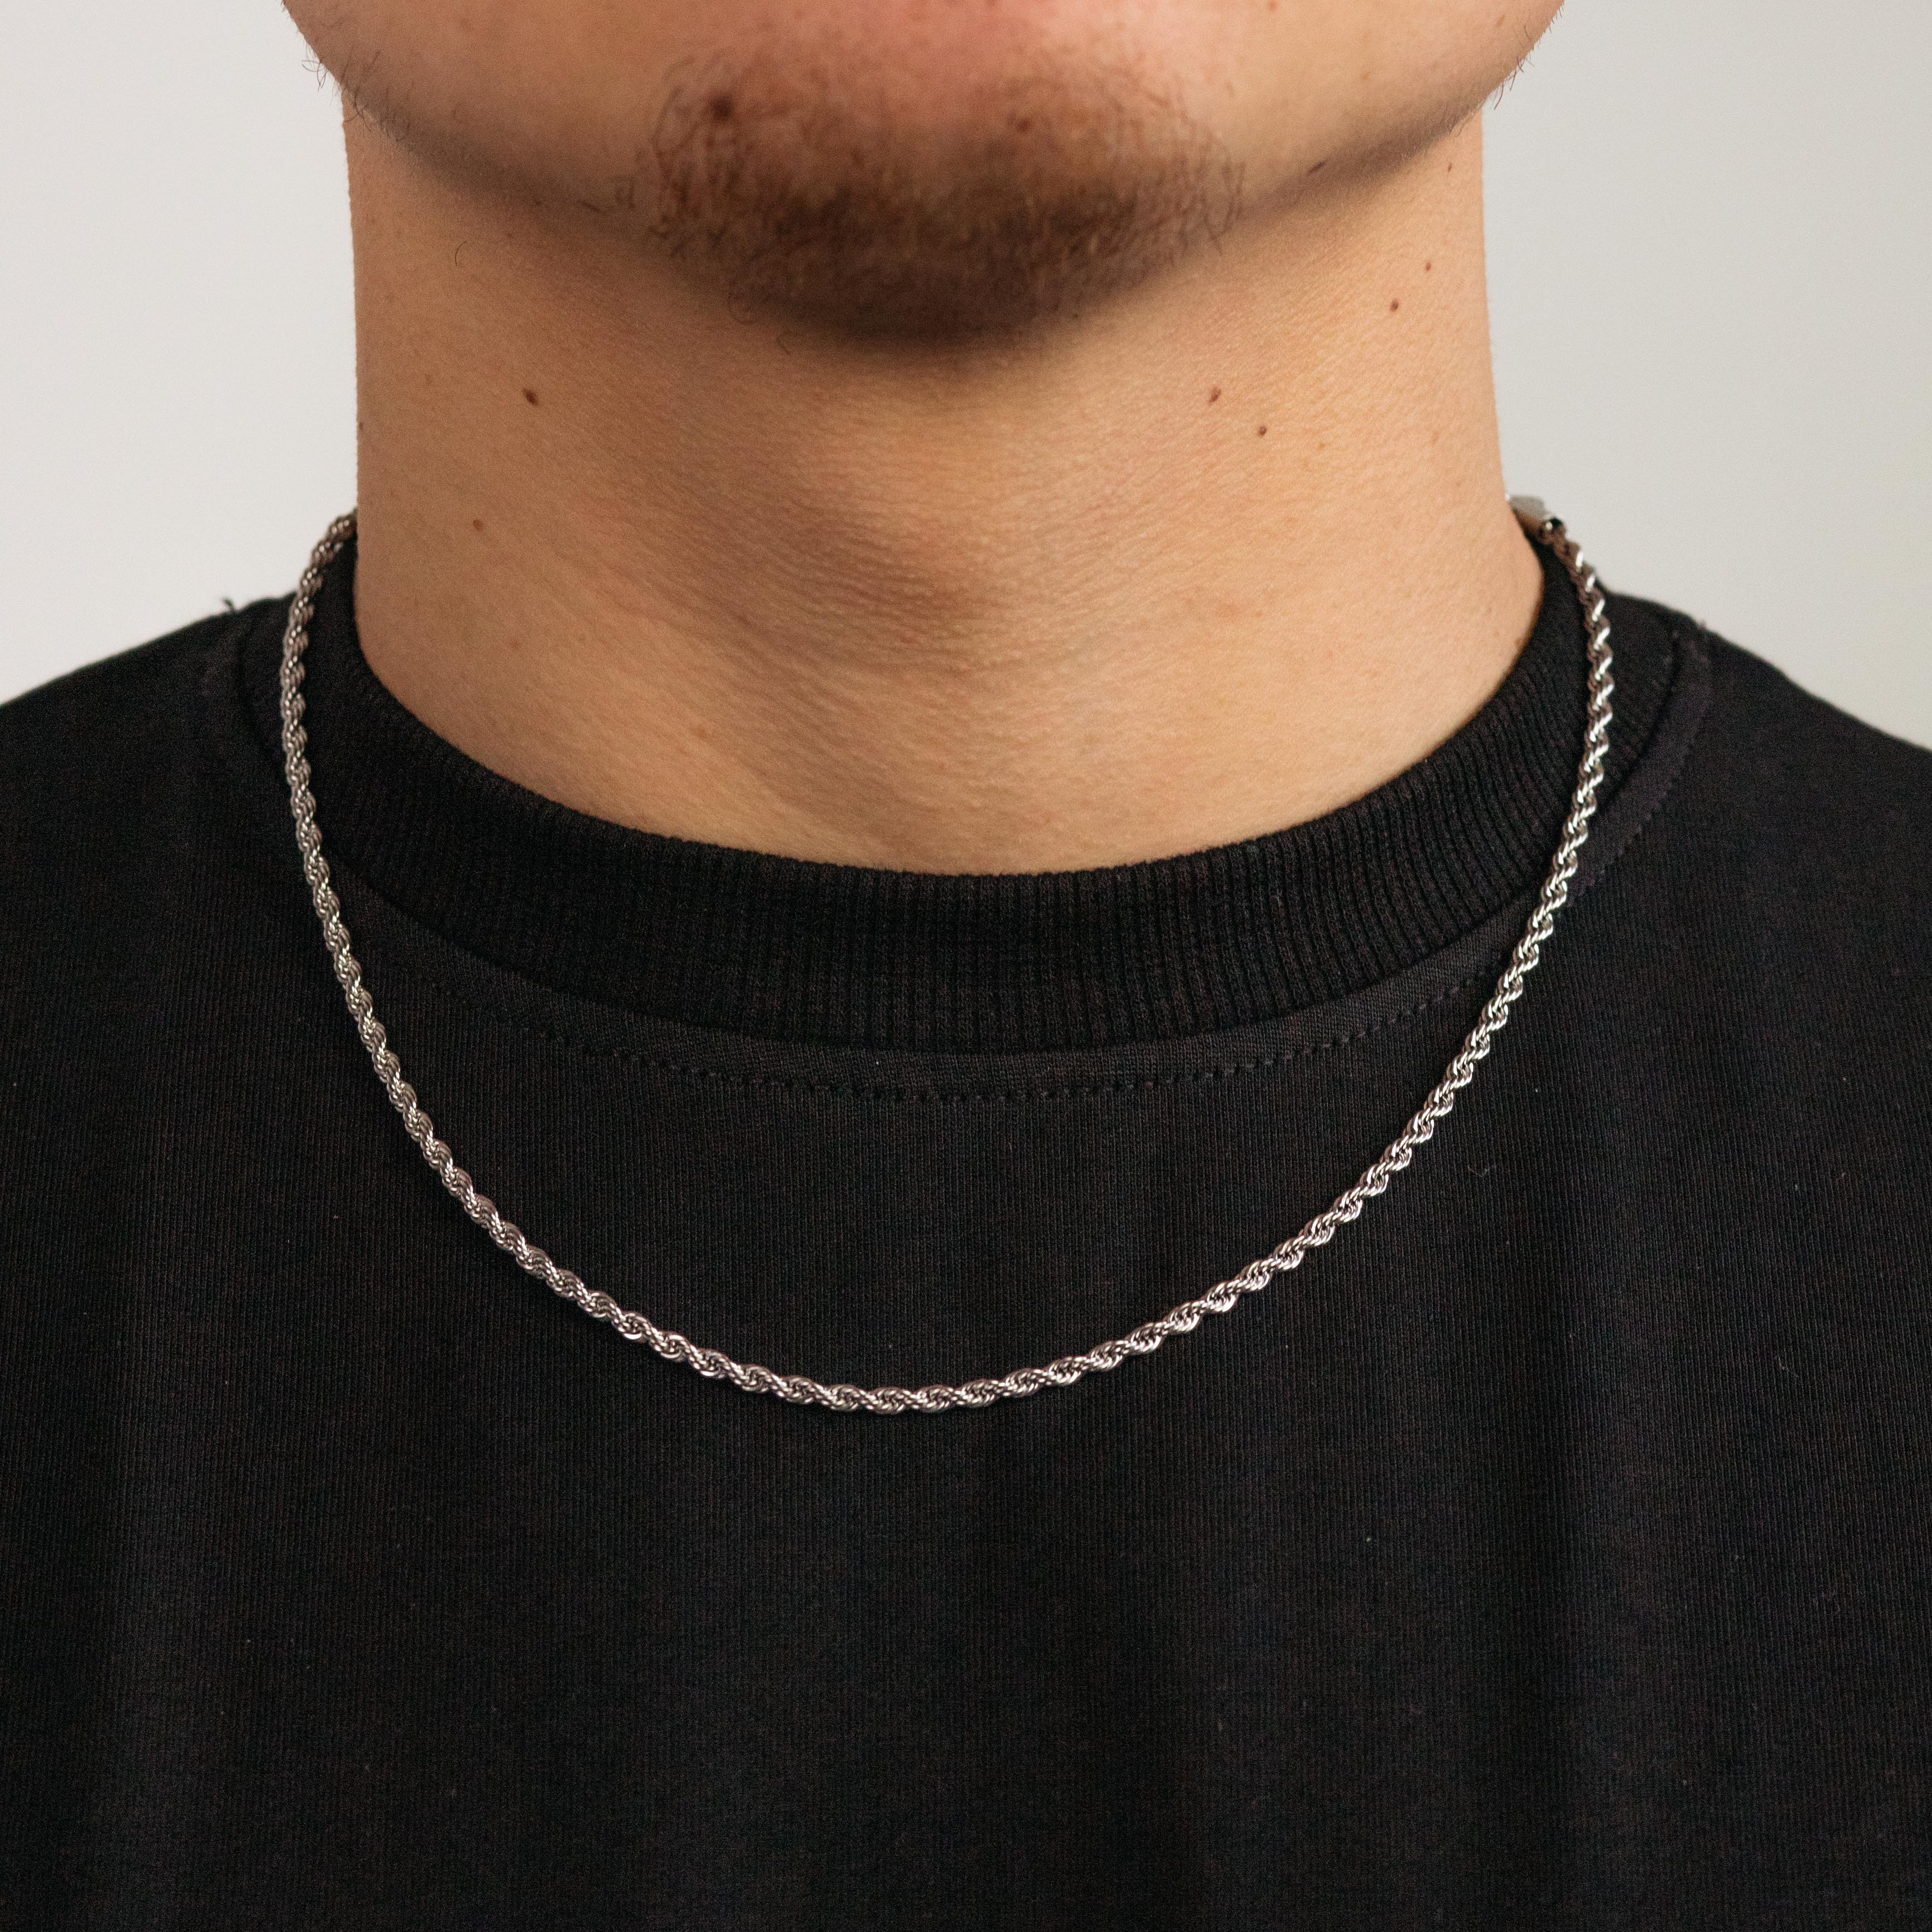 Silver Twisted Rope Chain